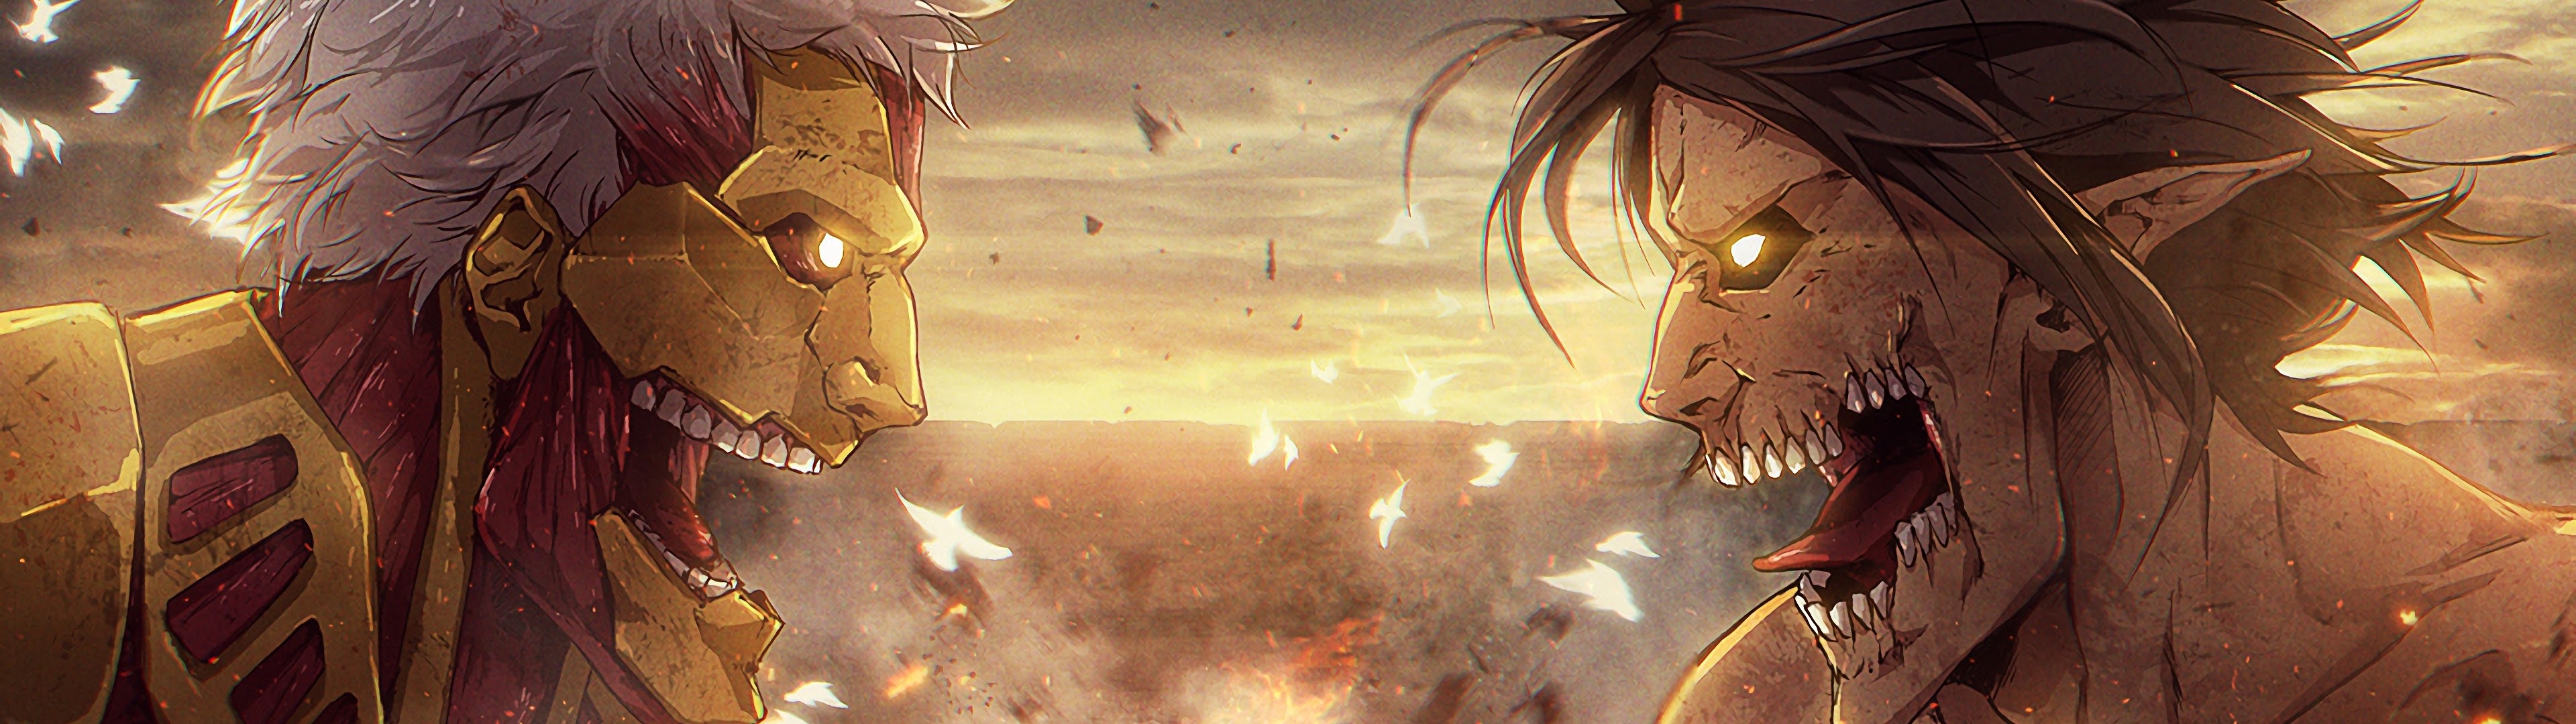 Amazing Anime Laptop Wallpaper Attack On Titan Images